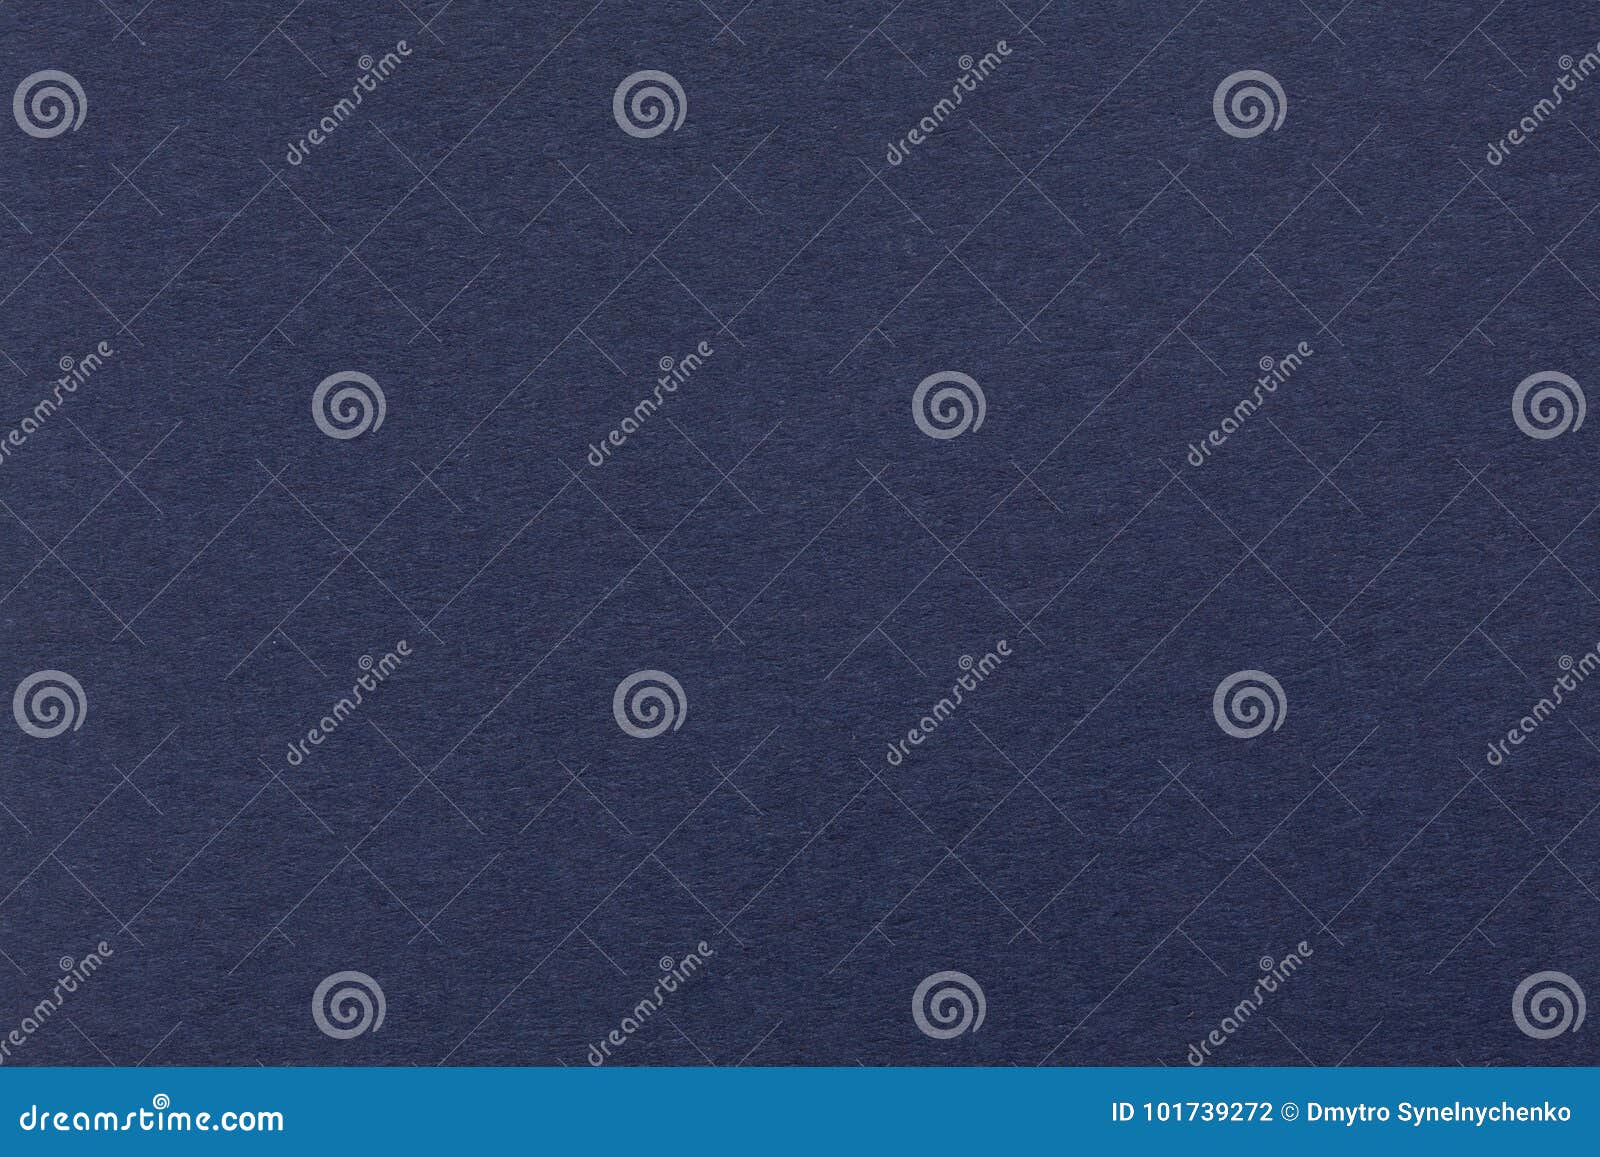 Dark Blue Paper Texture Background Stock Photo Image Of Classic